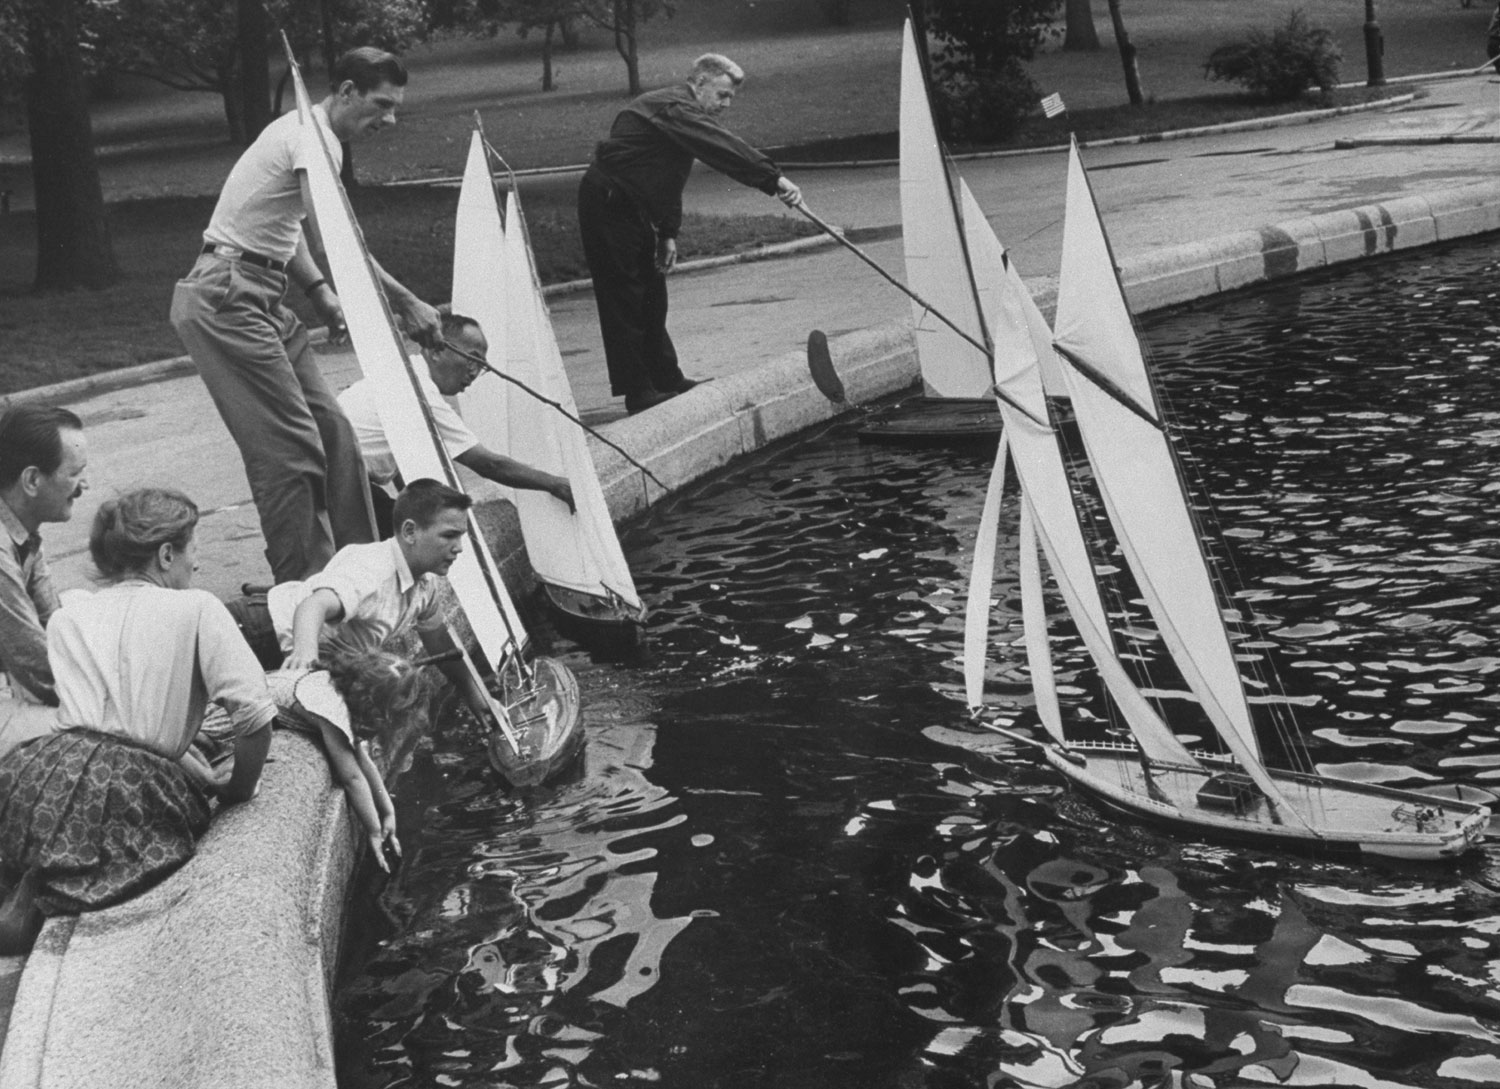 Model sailboats in Conservatory Pond, Central Park, 1961.